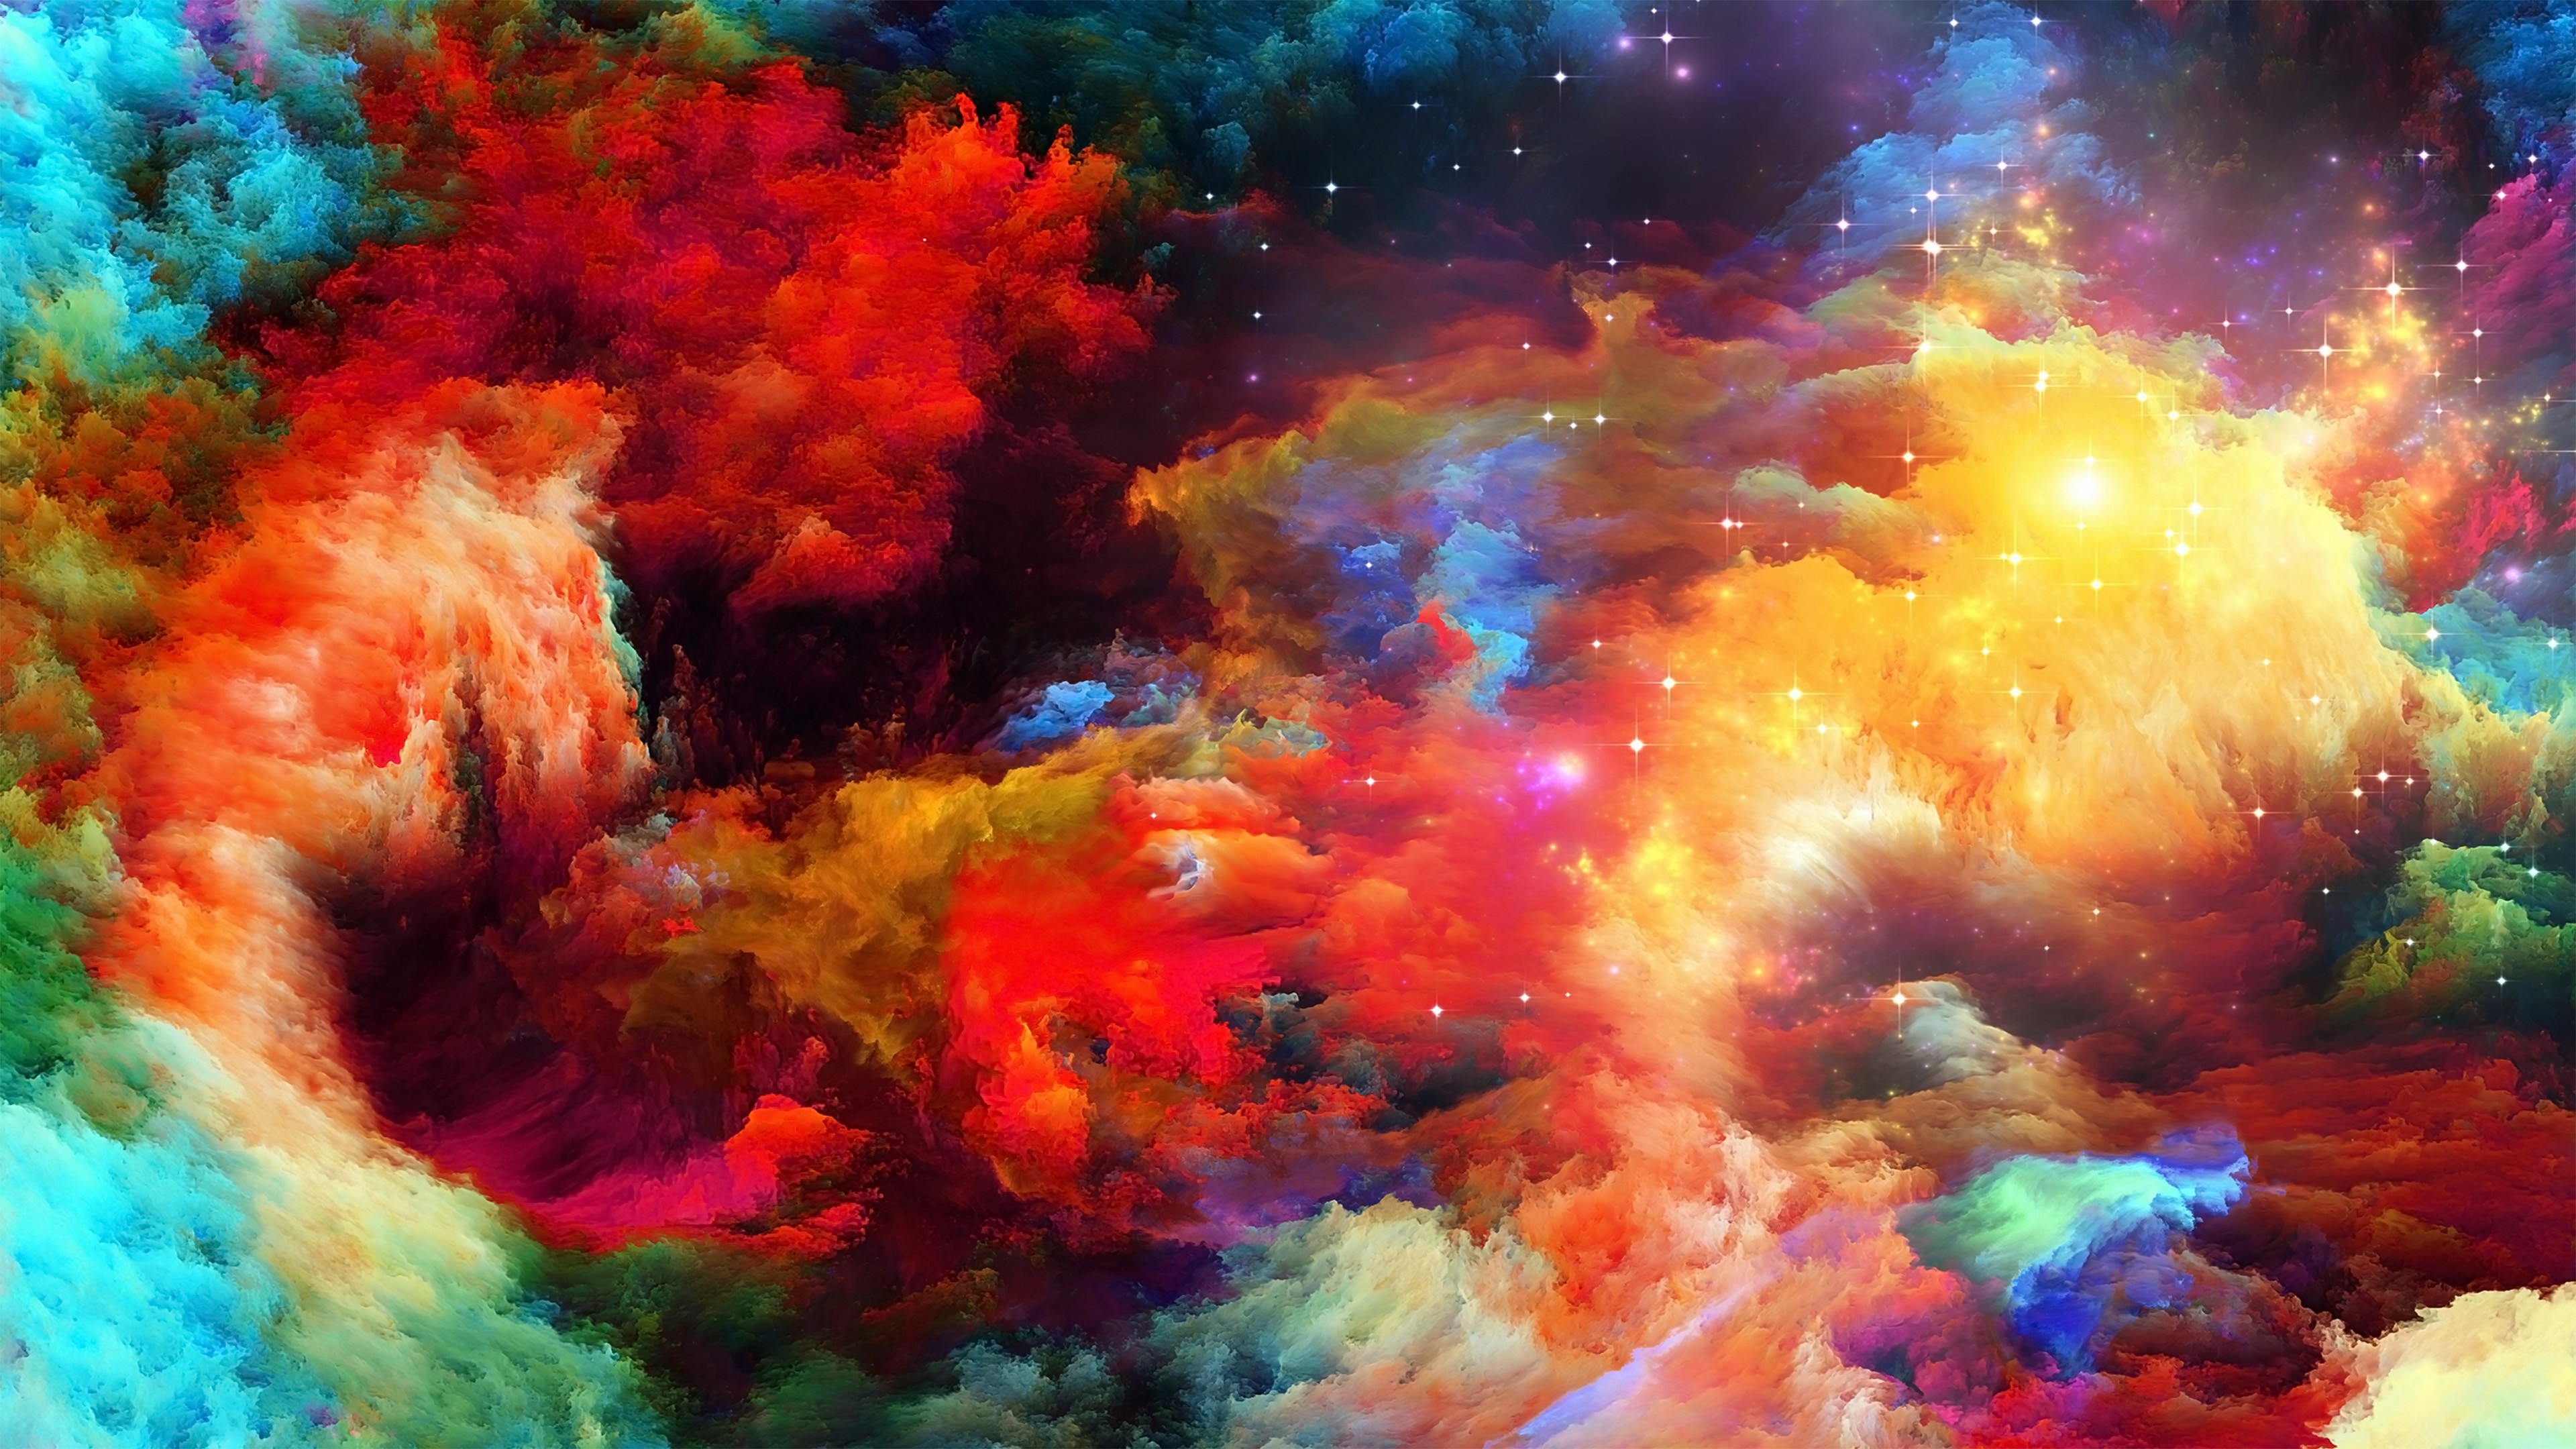 4K Abstract wallpaper ·① Download free stunning HD wallpapers for